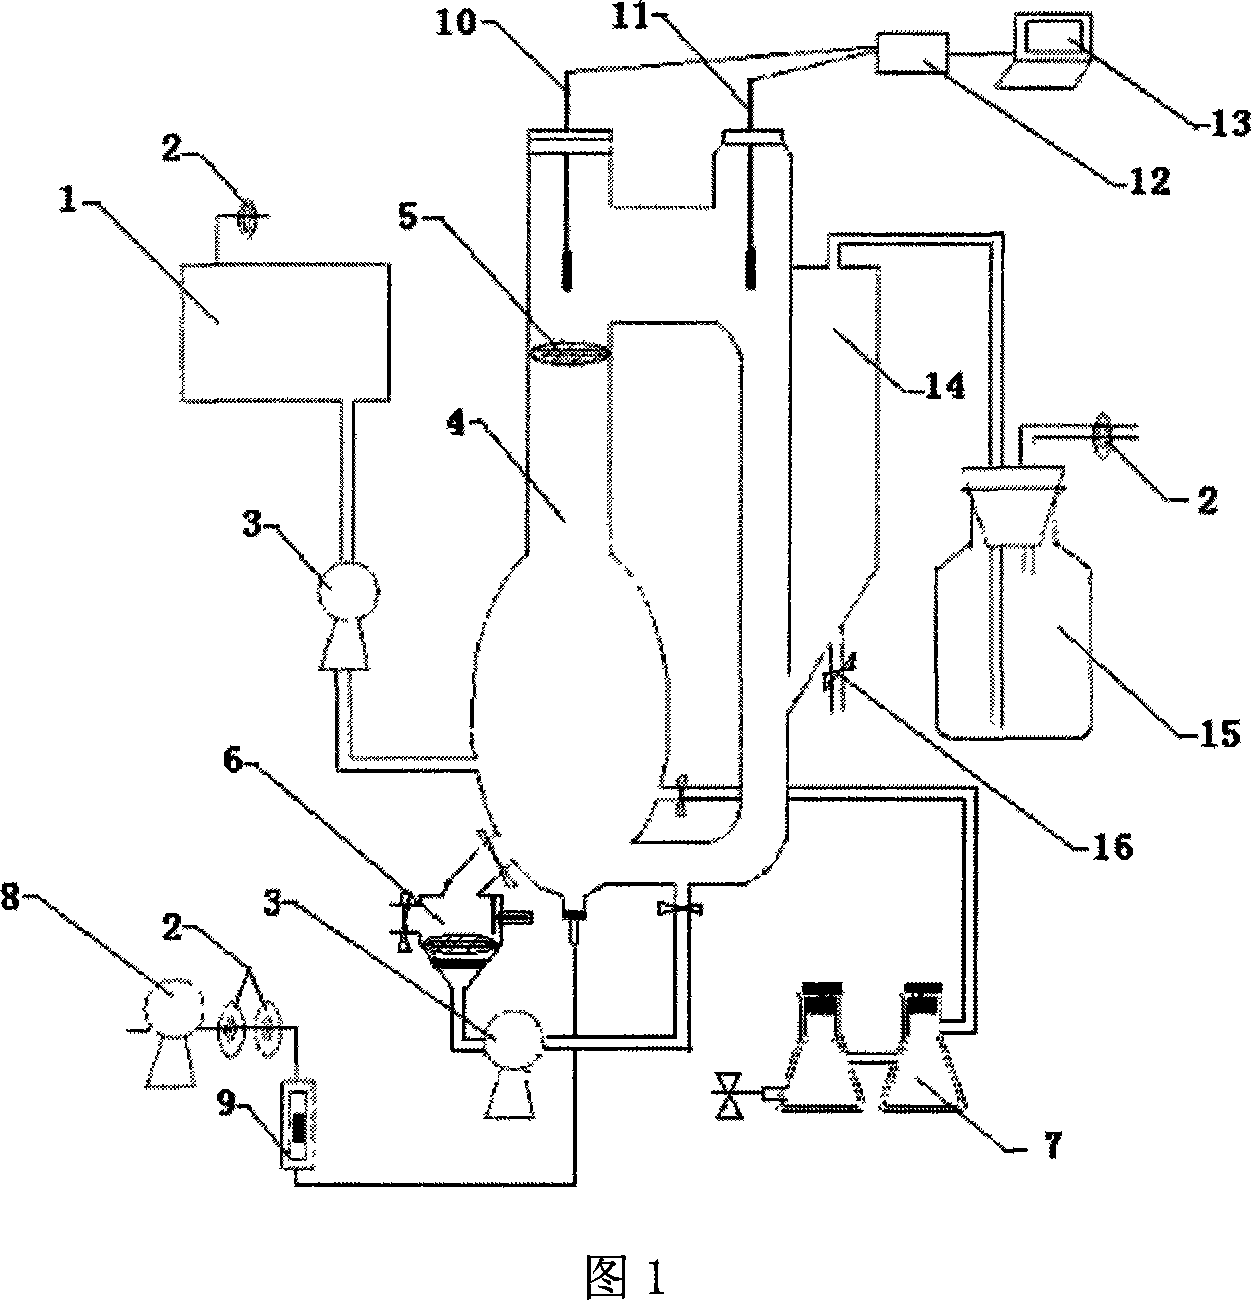 Airlift type bioreactor system for continuously bottling and culturing medicinal plant histiocyte